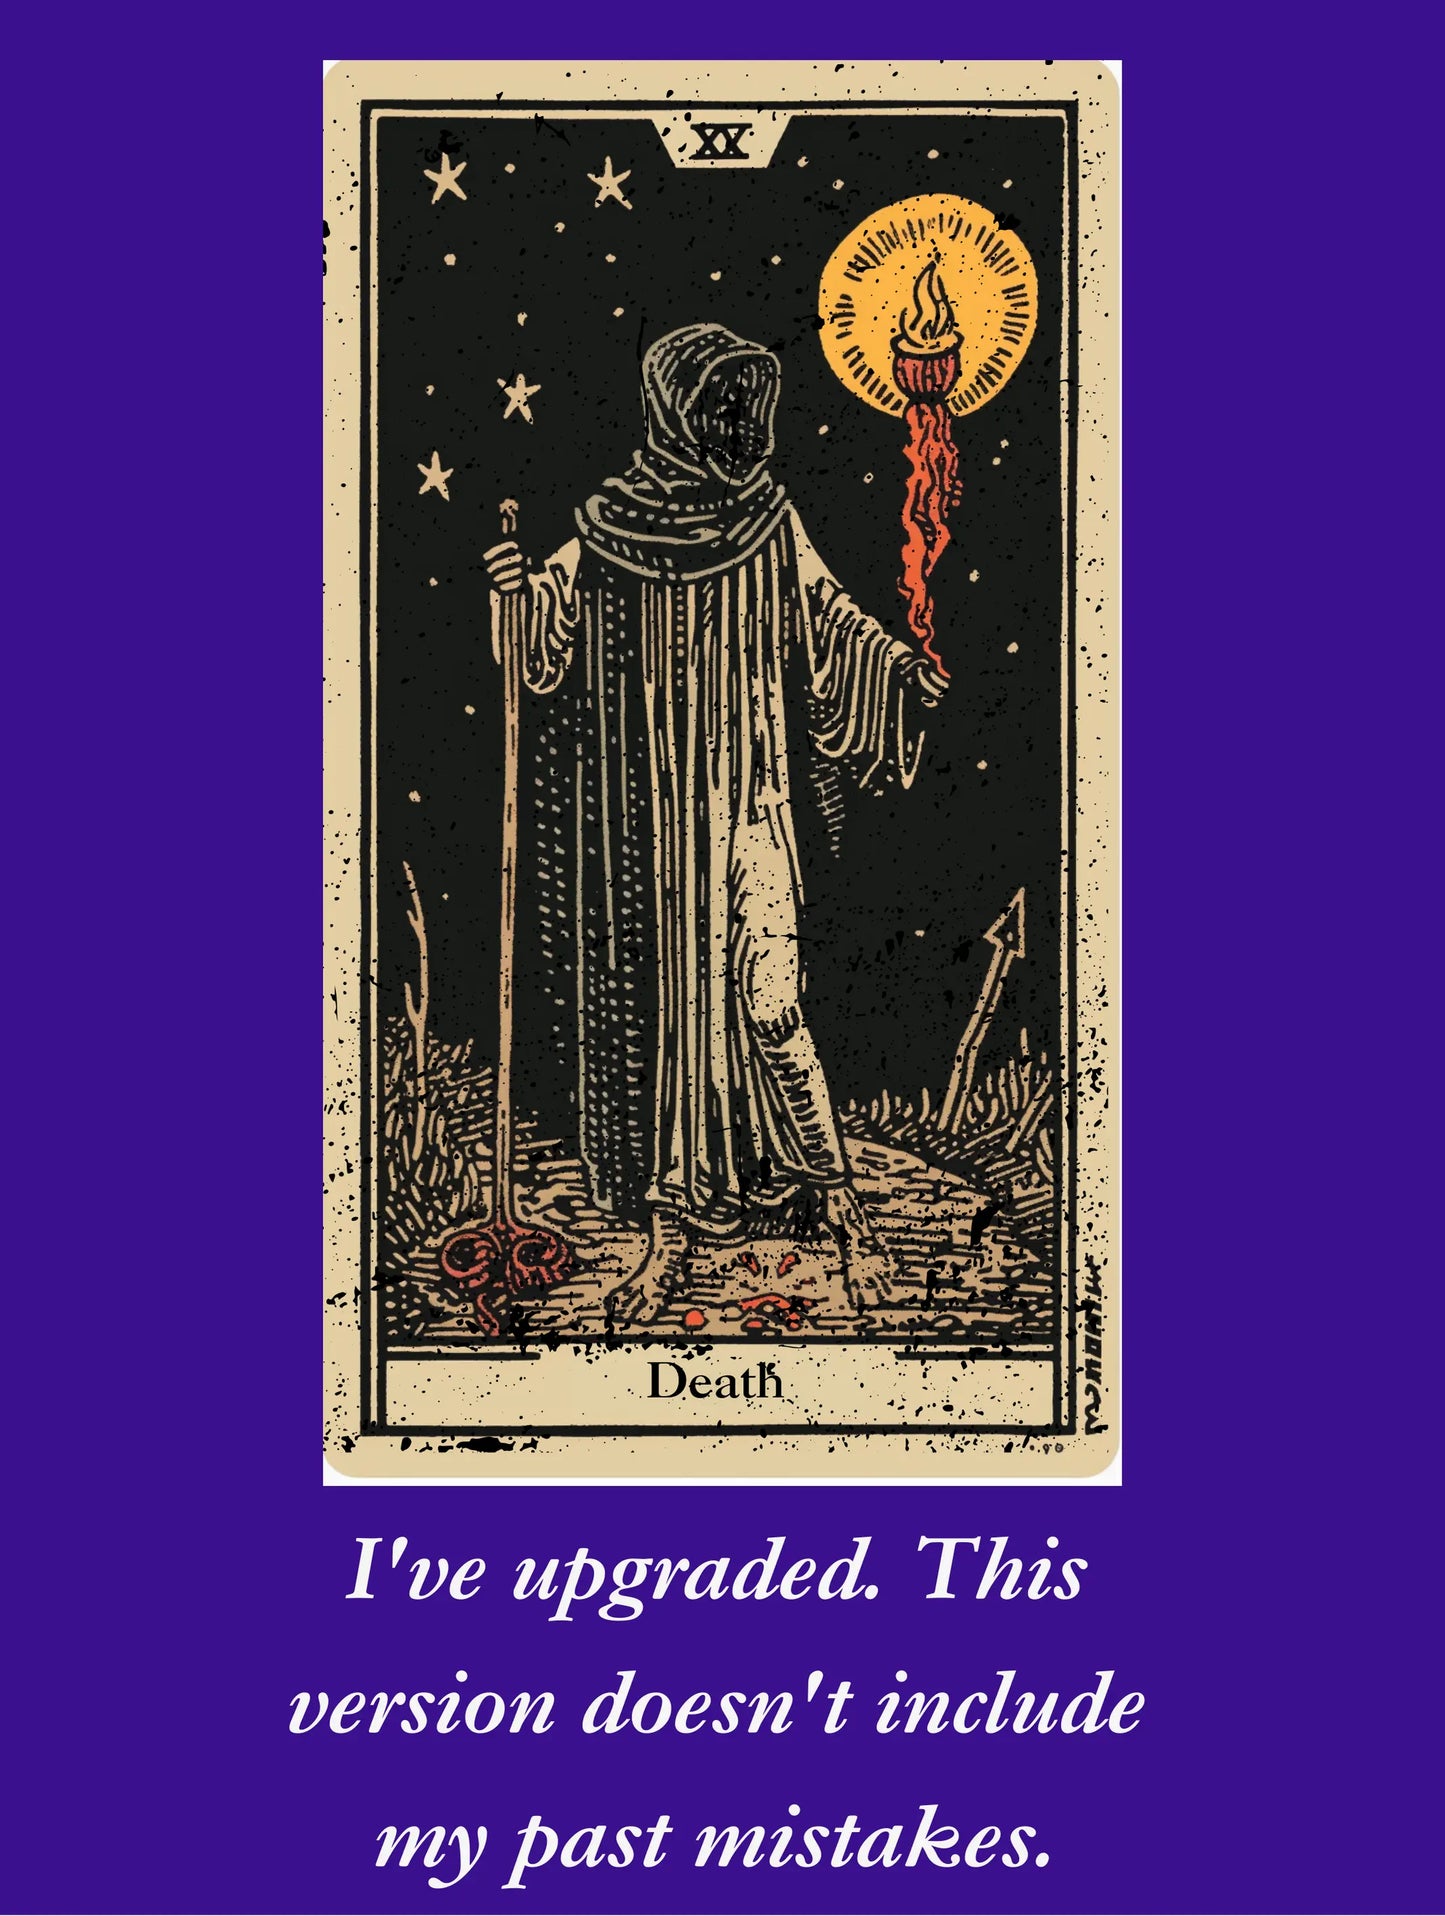 Death Tarot card. I've upgraded this version doesn't include my past mistakes, graphic  from BLK Moon Shop